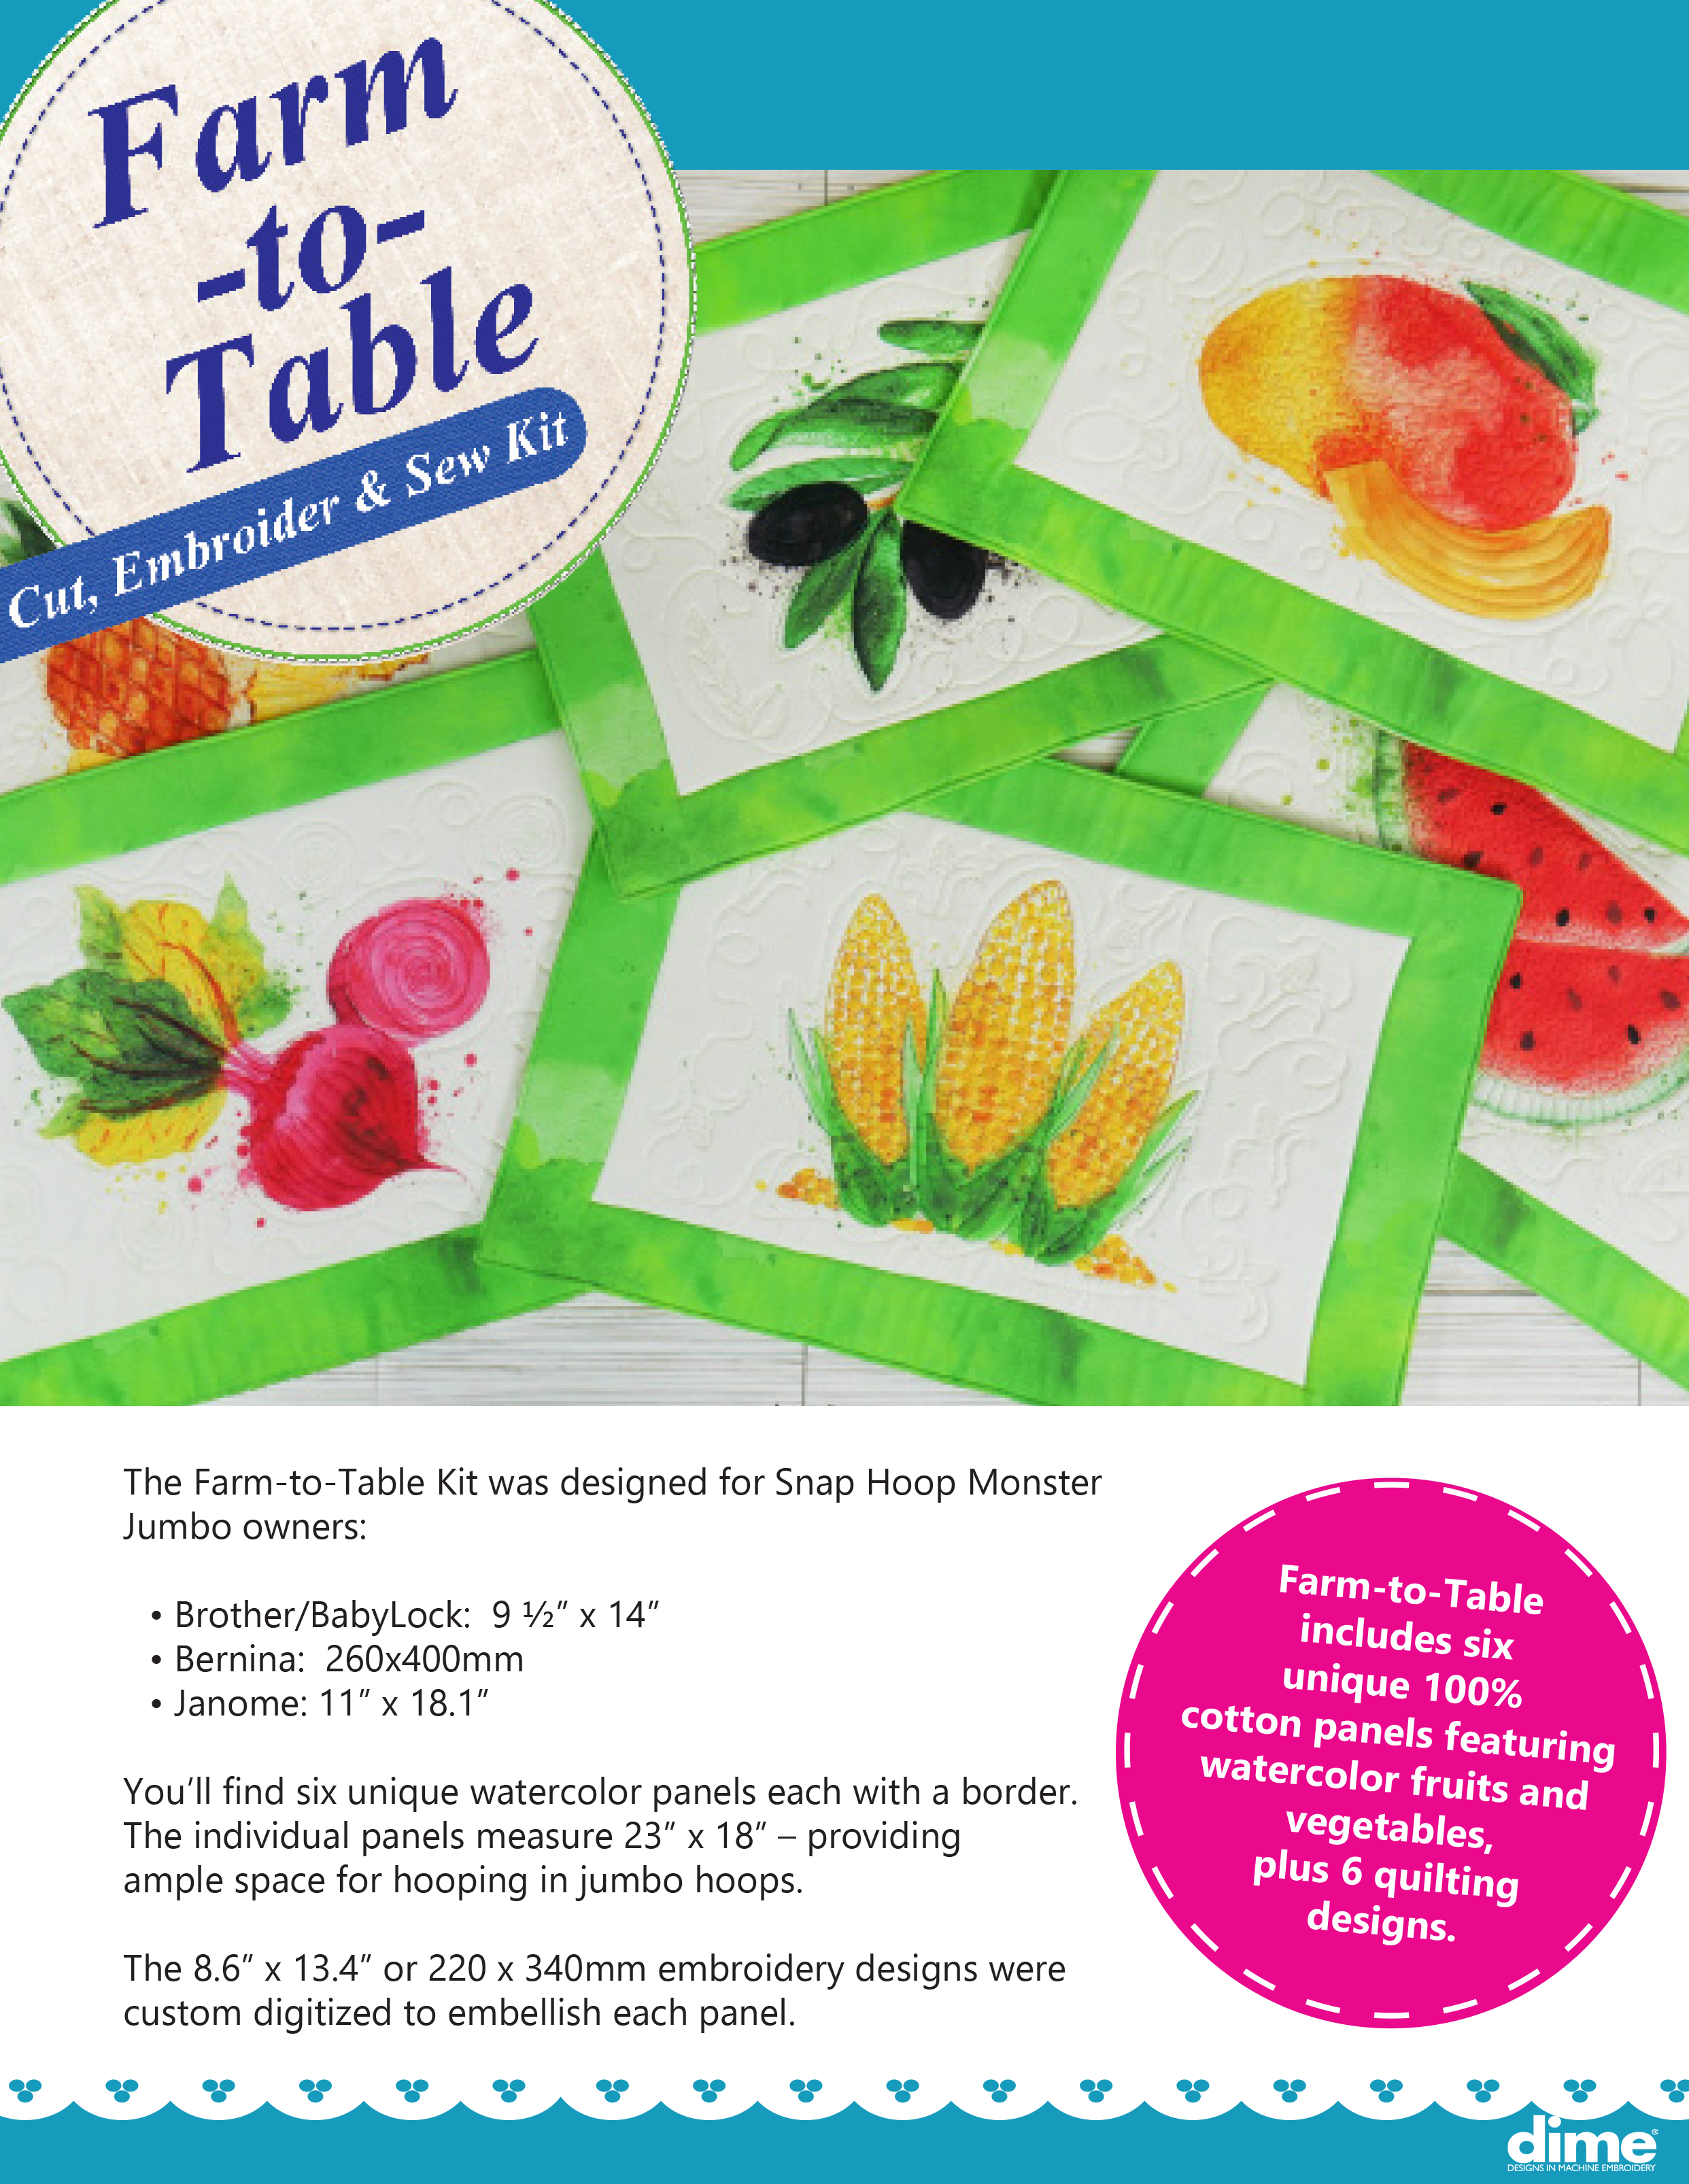 Farm-to-Table Project Kit